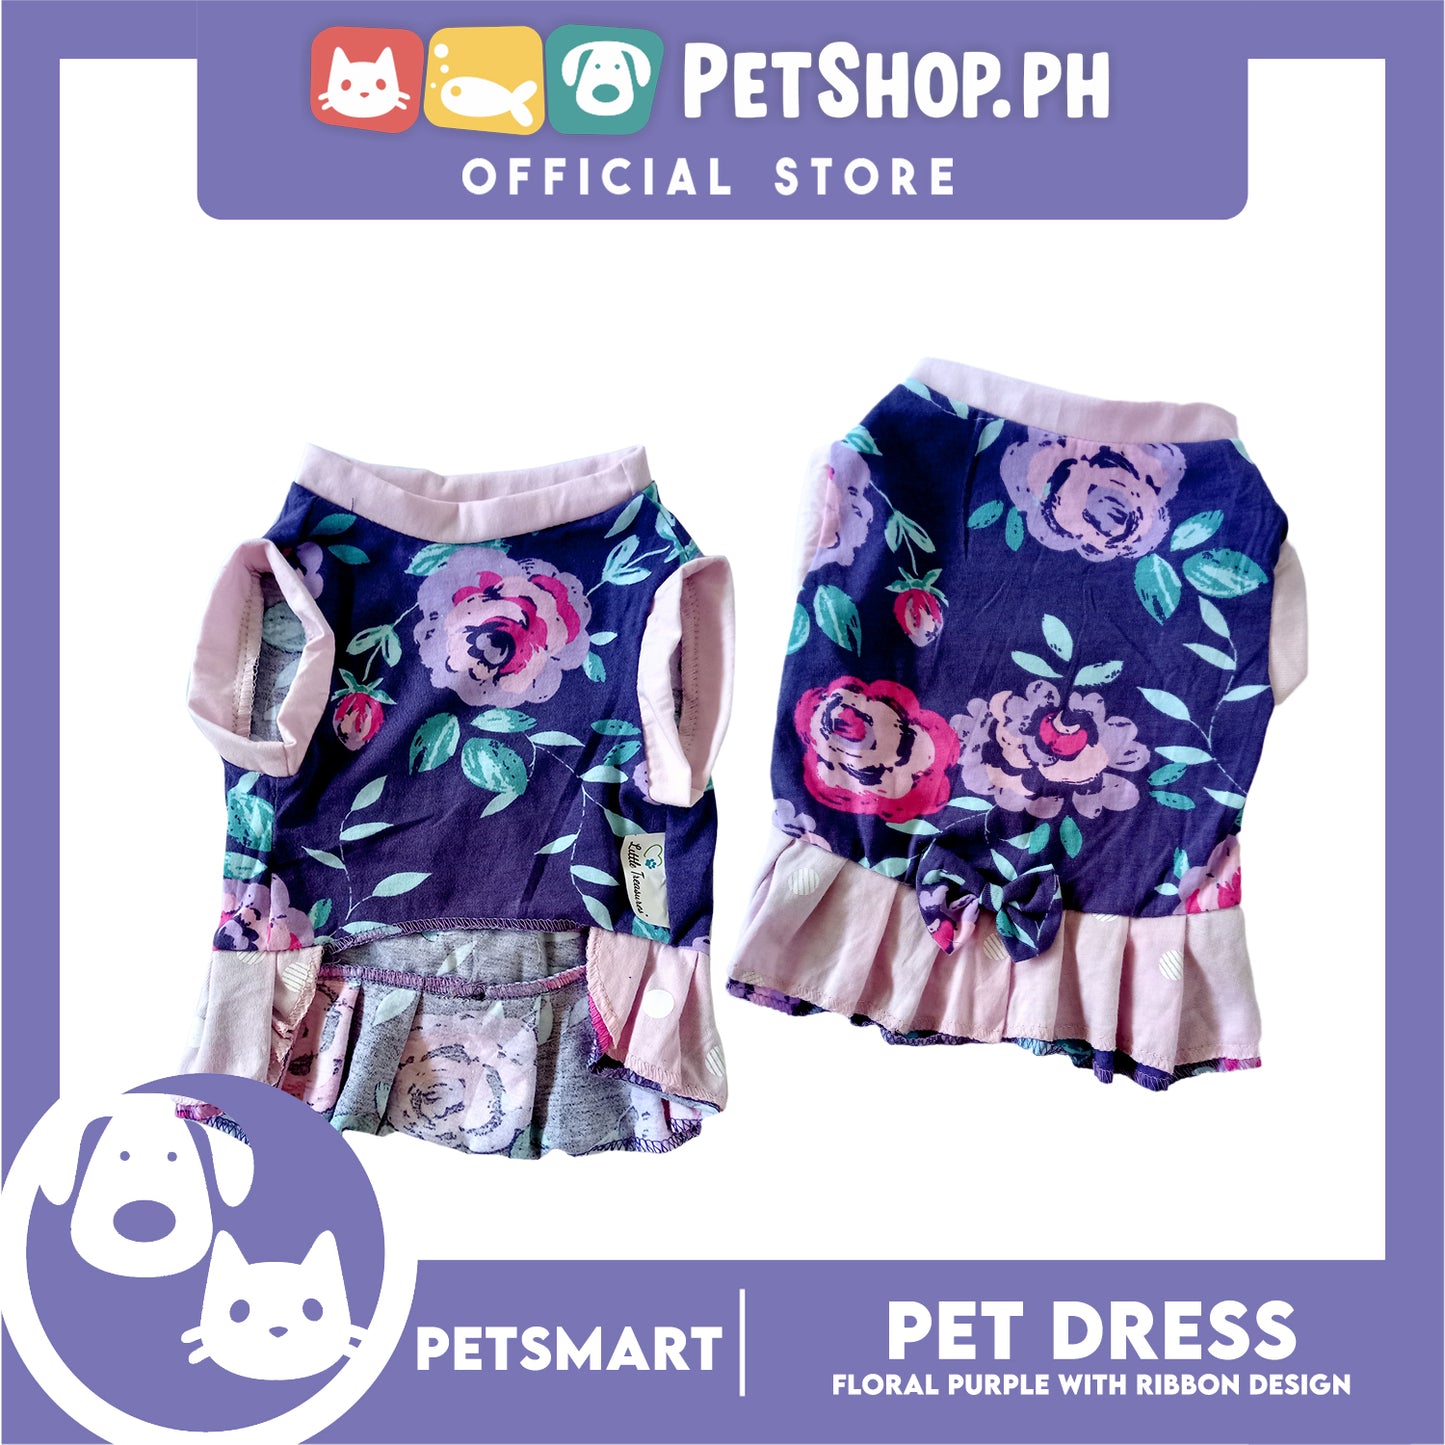 Pet Dress, Floral Purple with Ribbon Design DG-CTN159L (Large) Perfect Fit For Dogs And Cats, Pet Clothes, Soft and Comfortable Pet Clothing